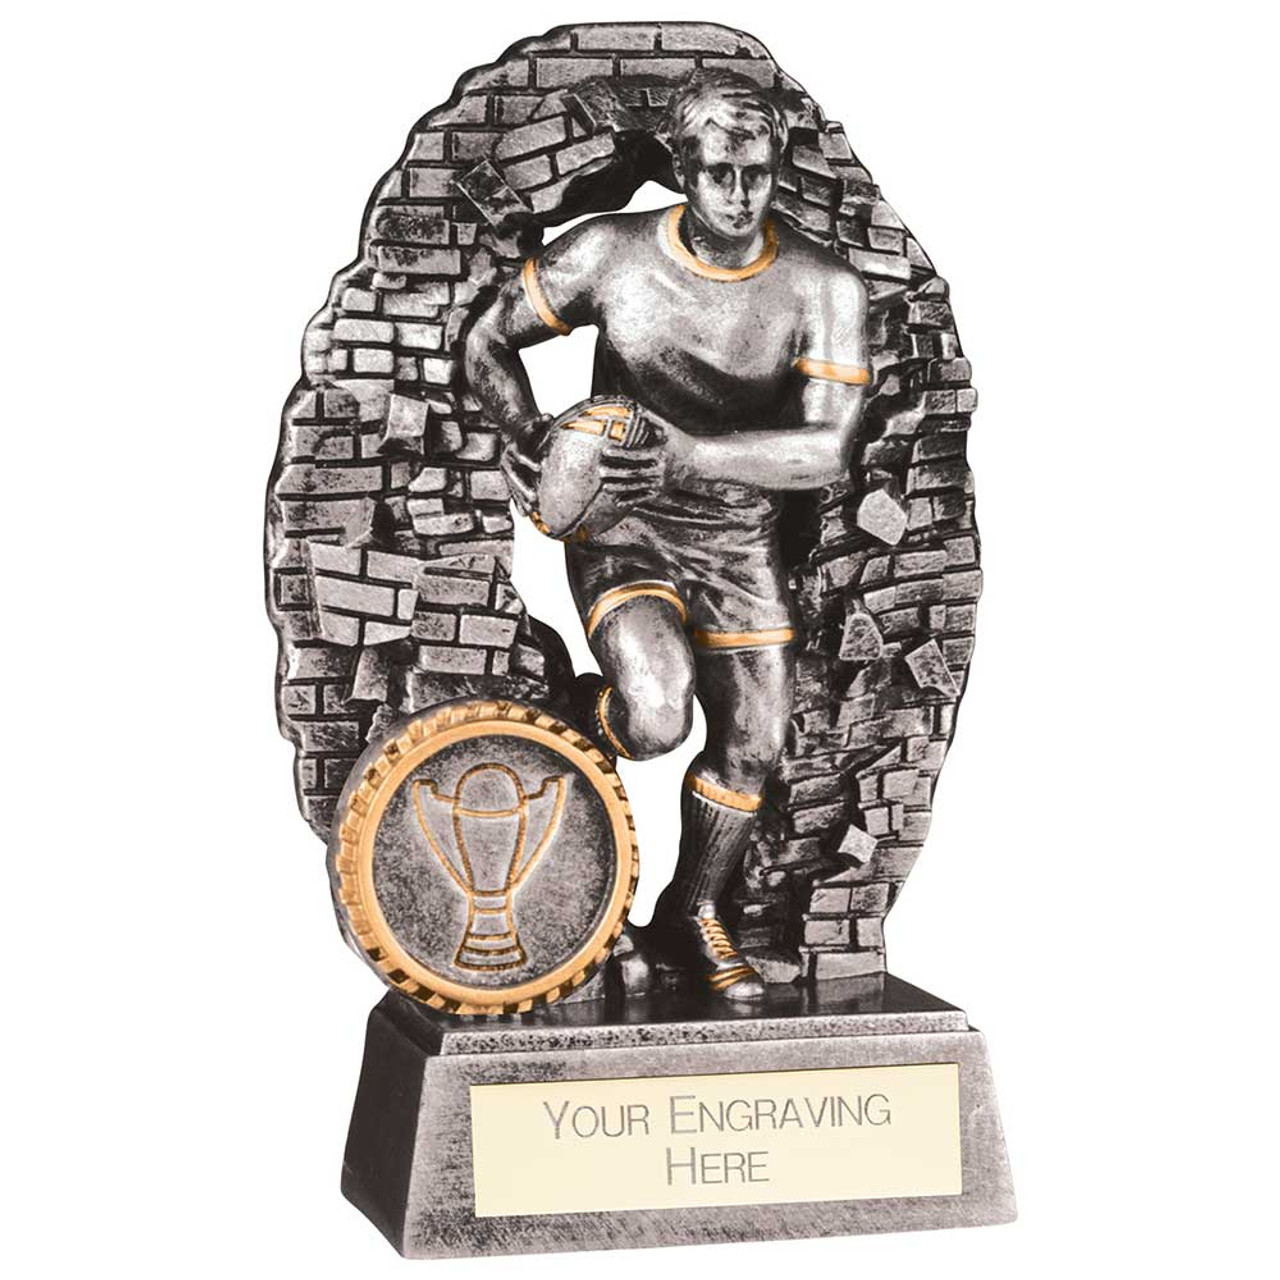  Rugby Award Blast Out Resin Male Trophy Silver Prize With Free Engraving at 1st Place 4 Trophies